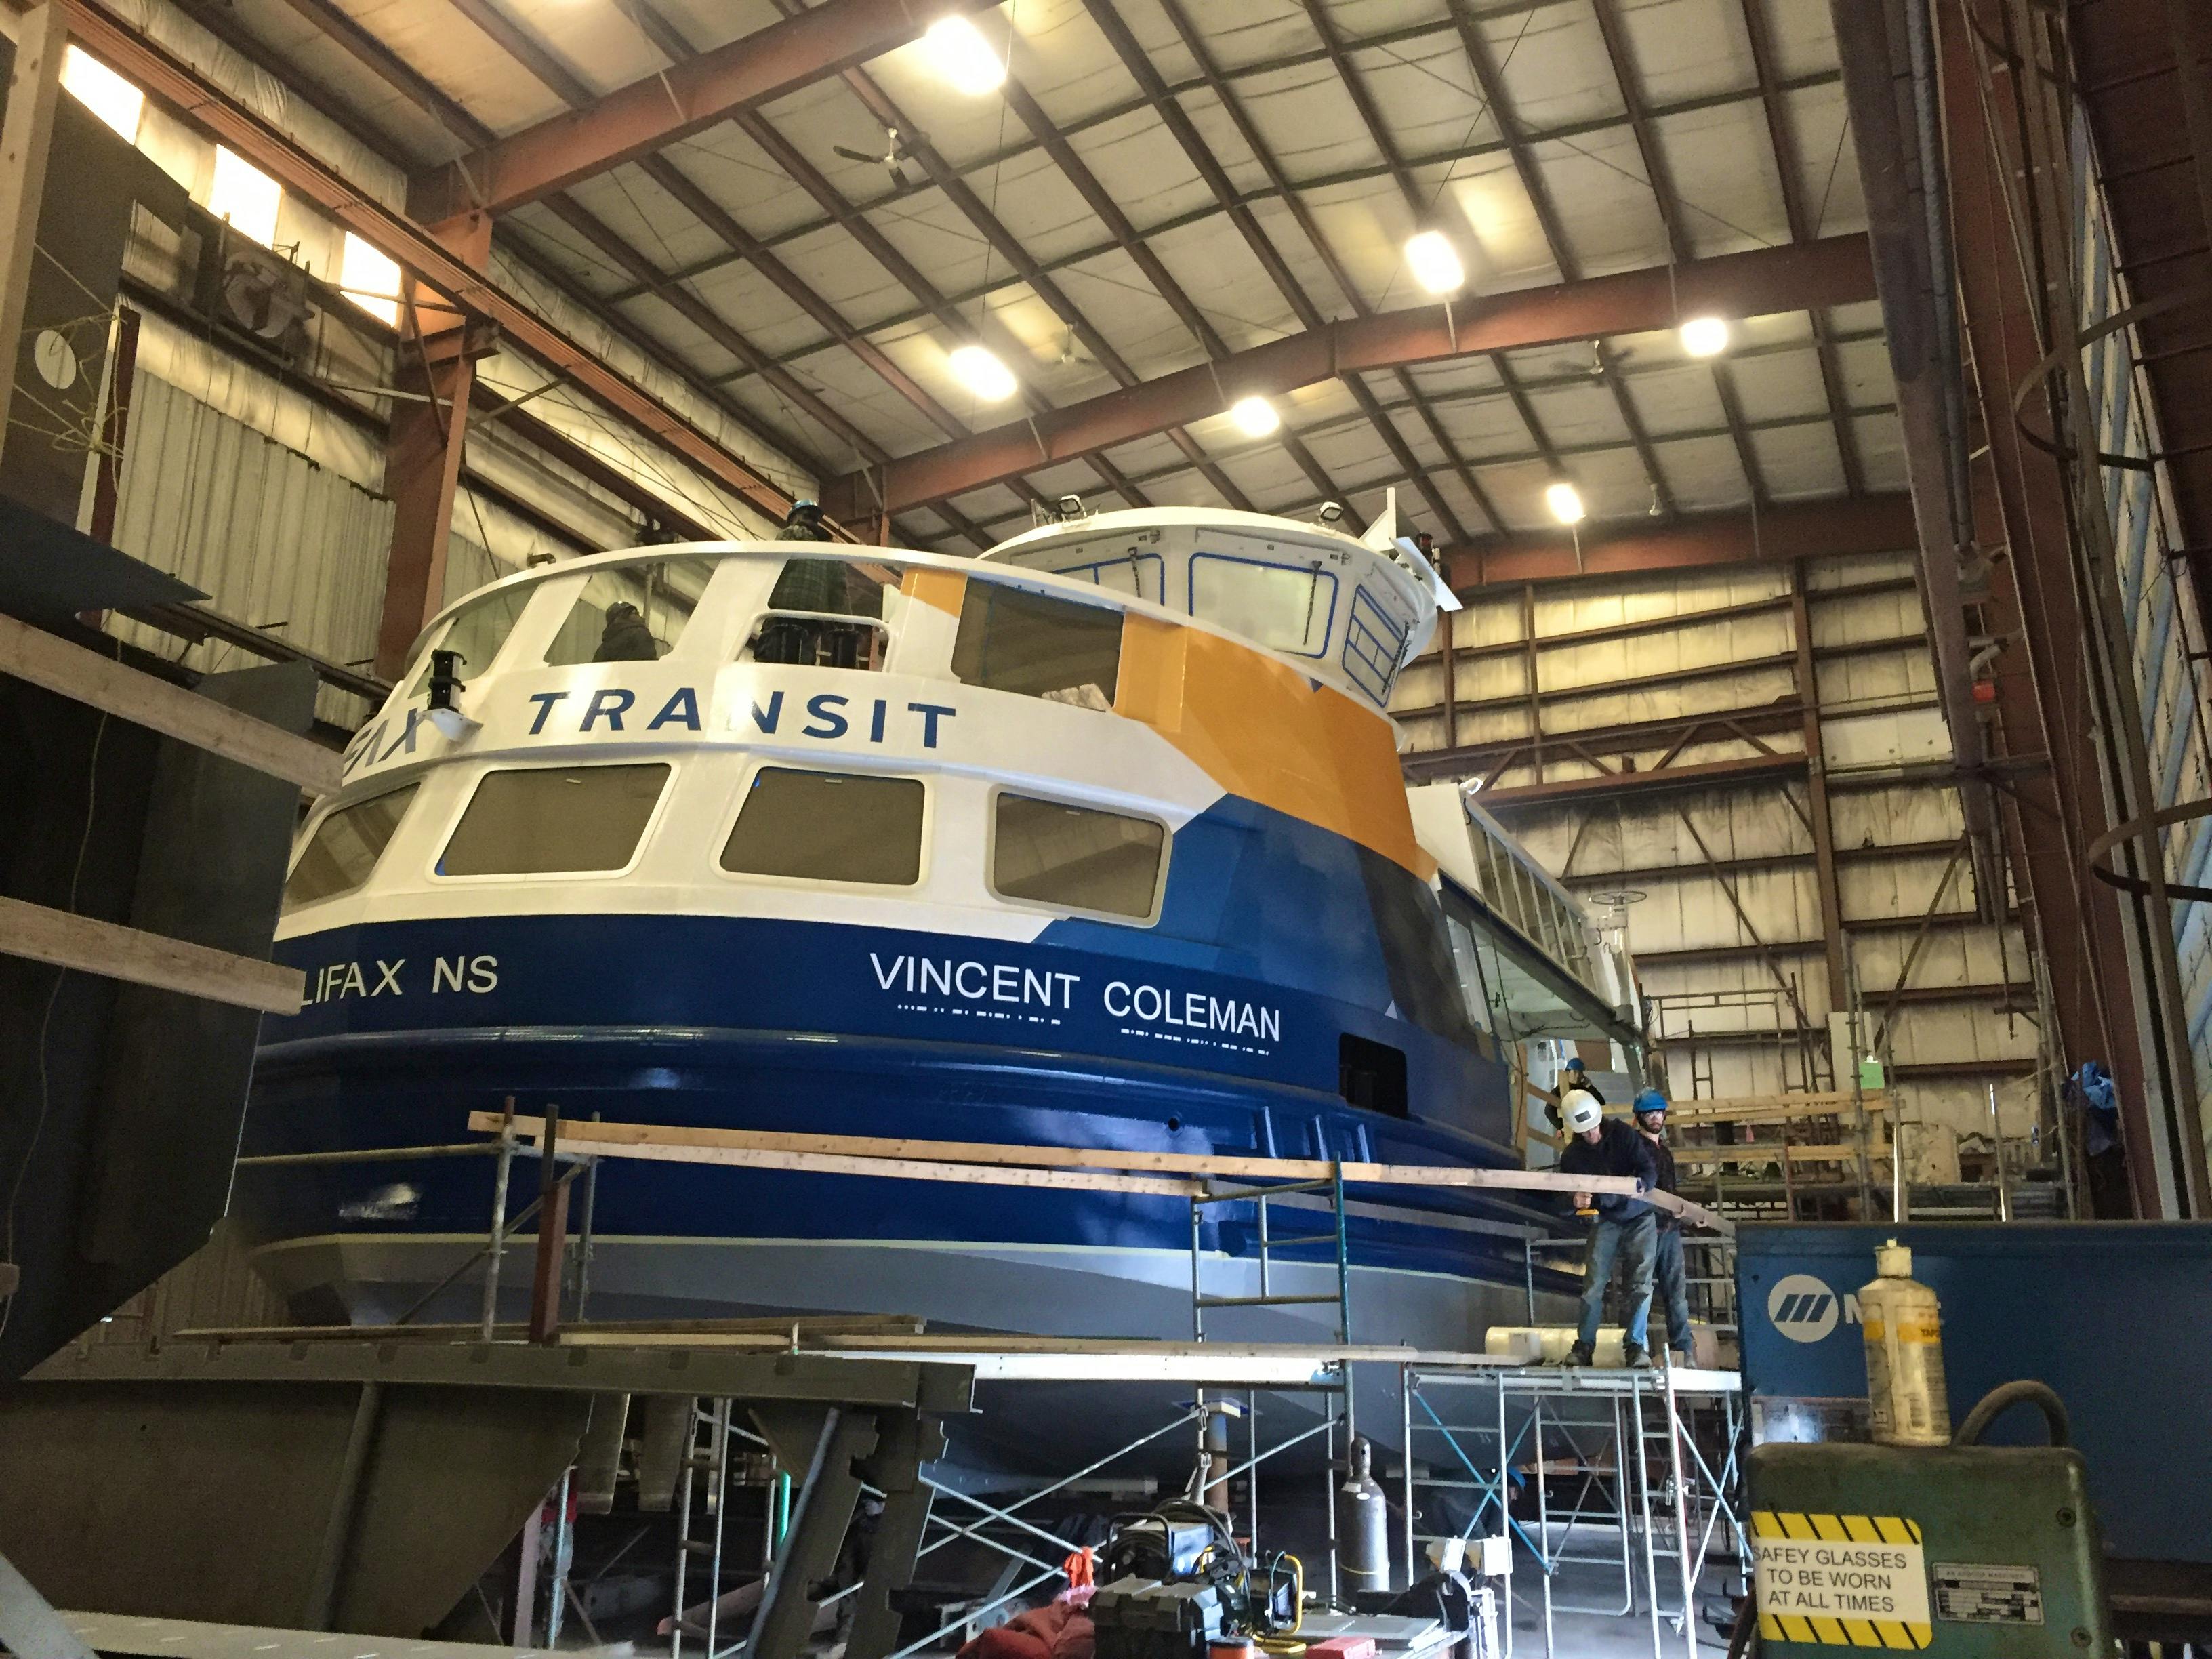 On the job: A sense of pride at A.F. Theriault following completion of  Halifax ferry named Vincent Coleman